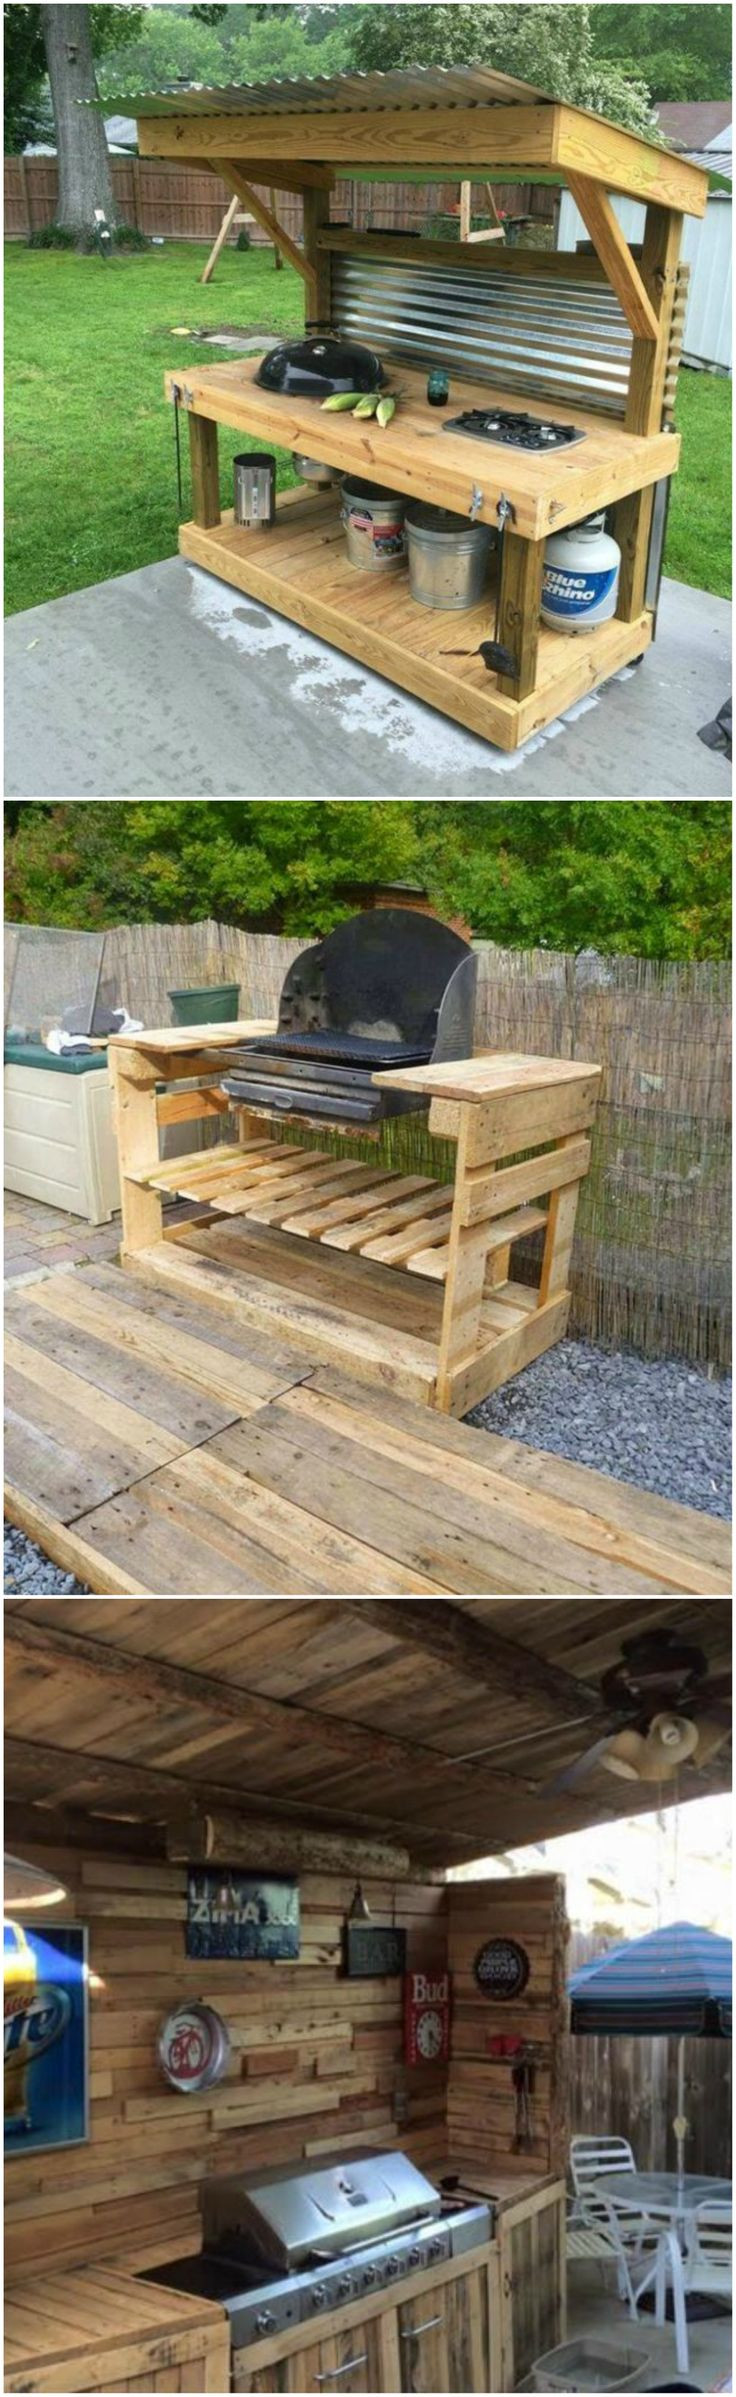 DIY Outdoor Grilling Station
 Upcycled Pallet Outdoor Grill DIY